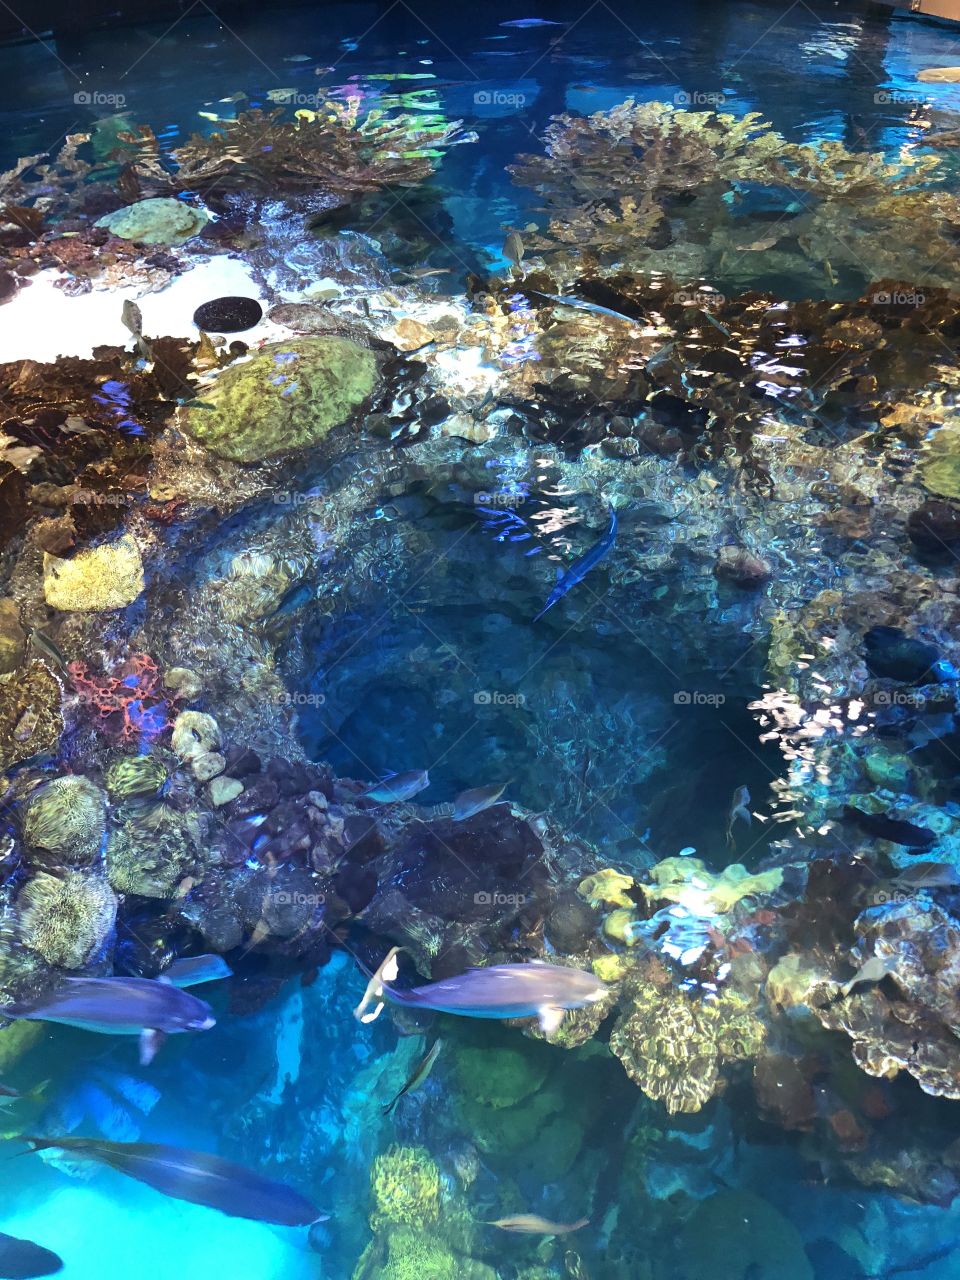 An aerial shot of the large tank and reef life in Boston’s aquarium. 